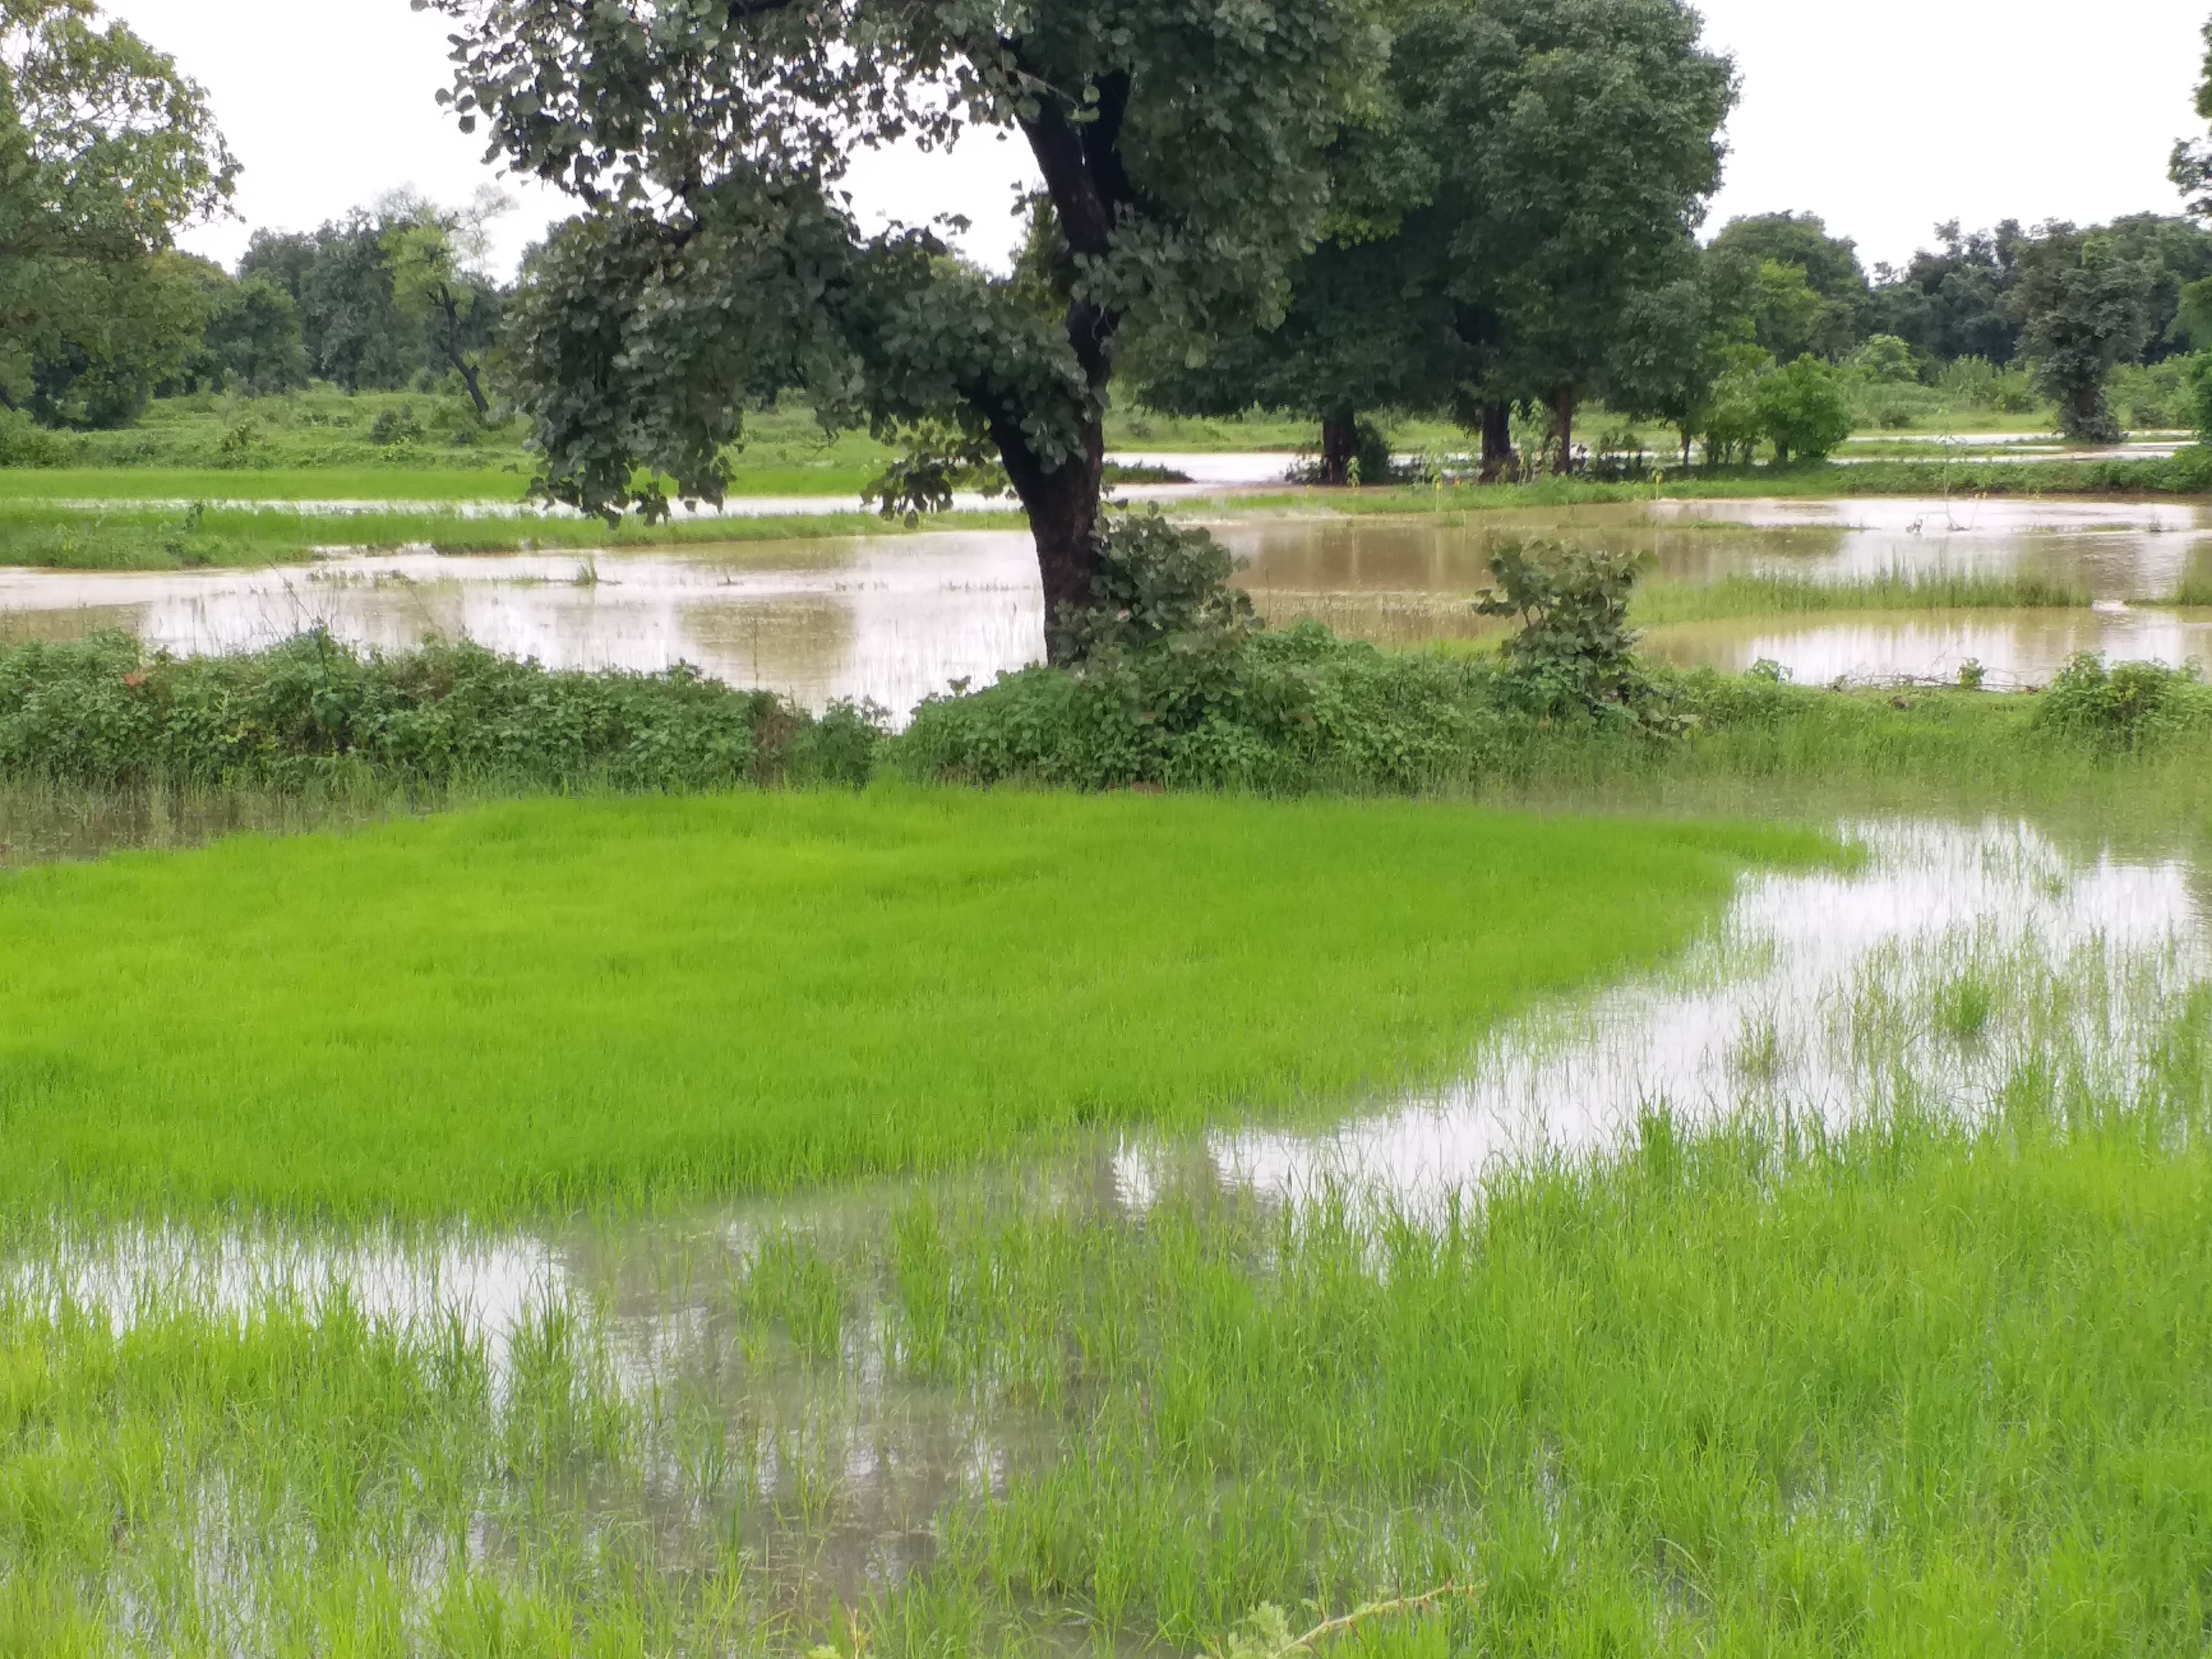 Farms became ponds in Shahdol